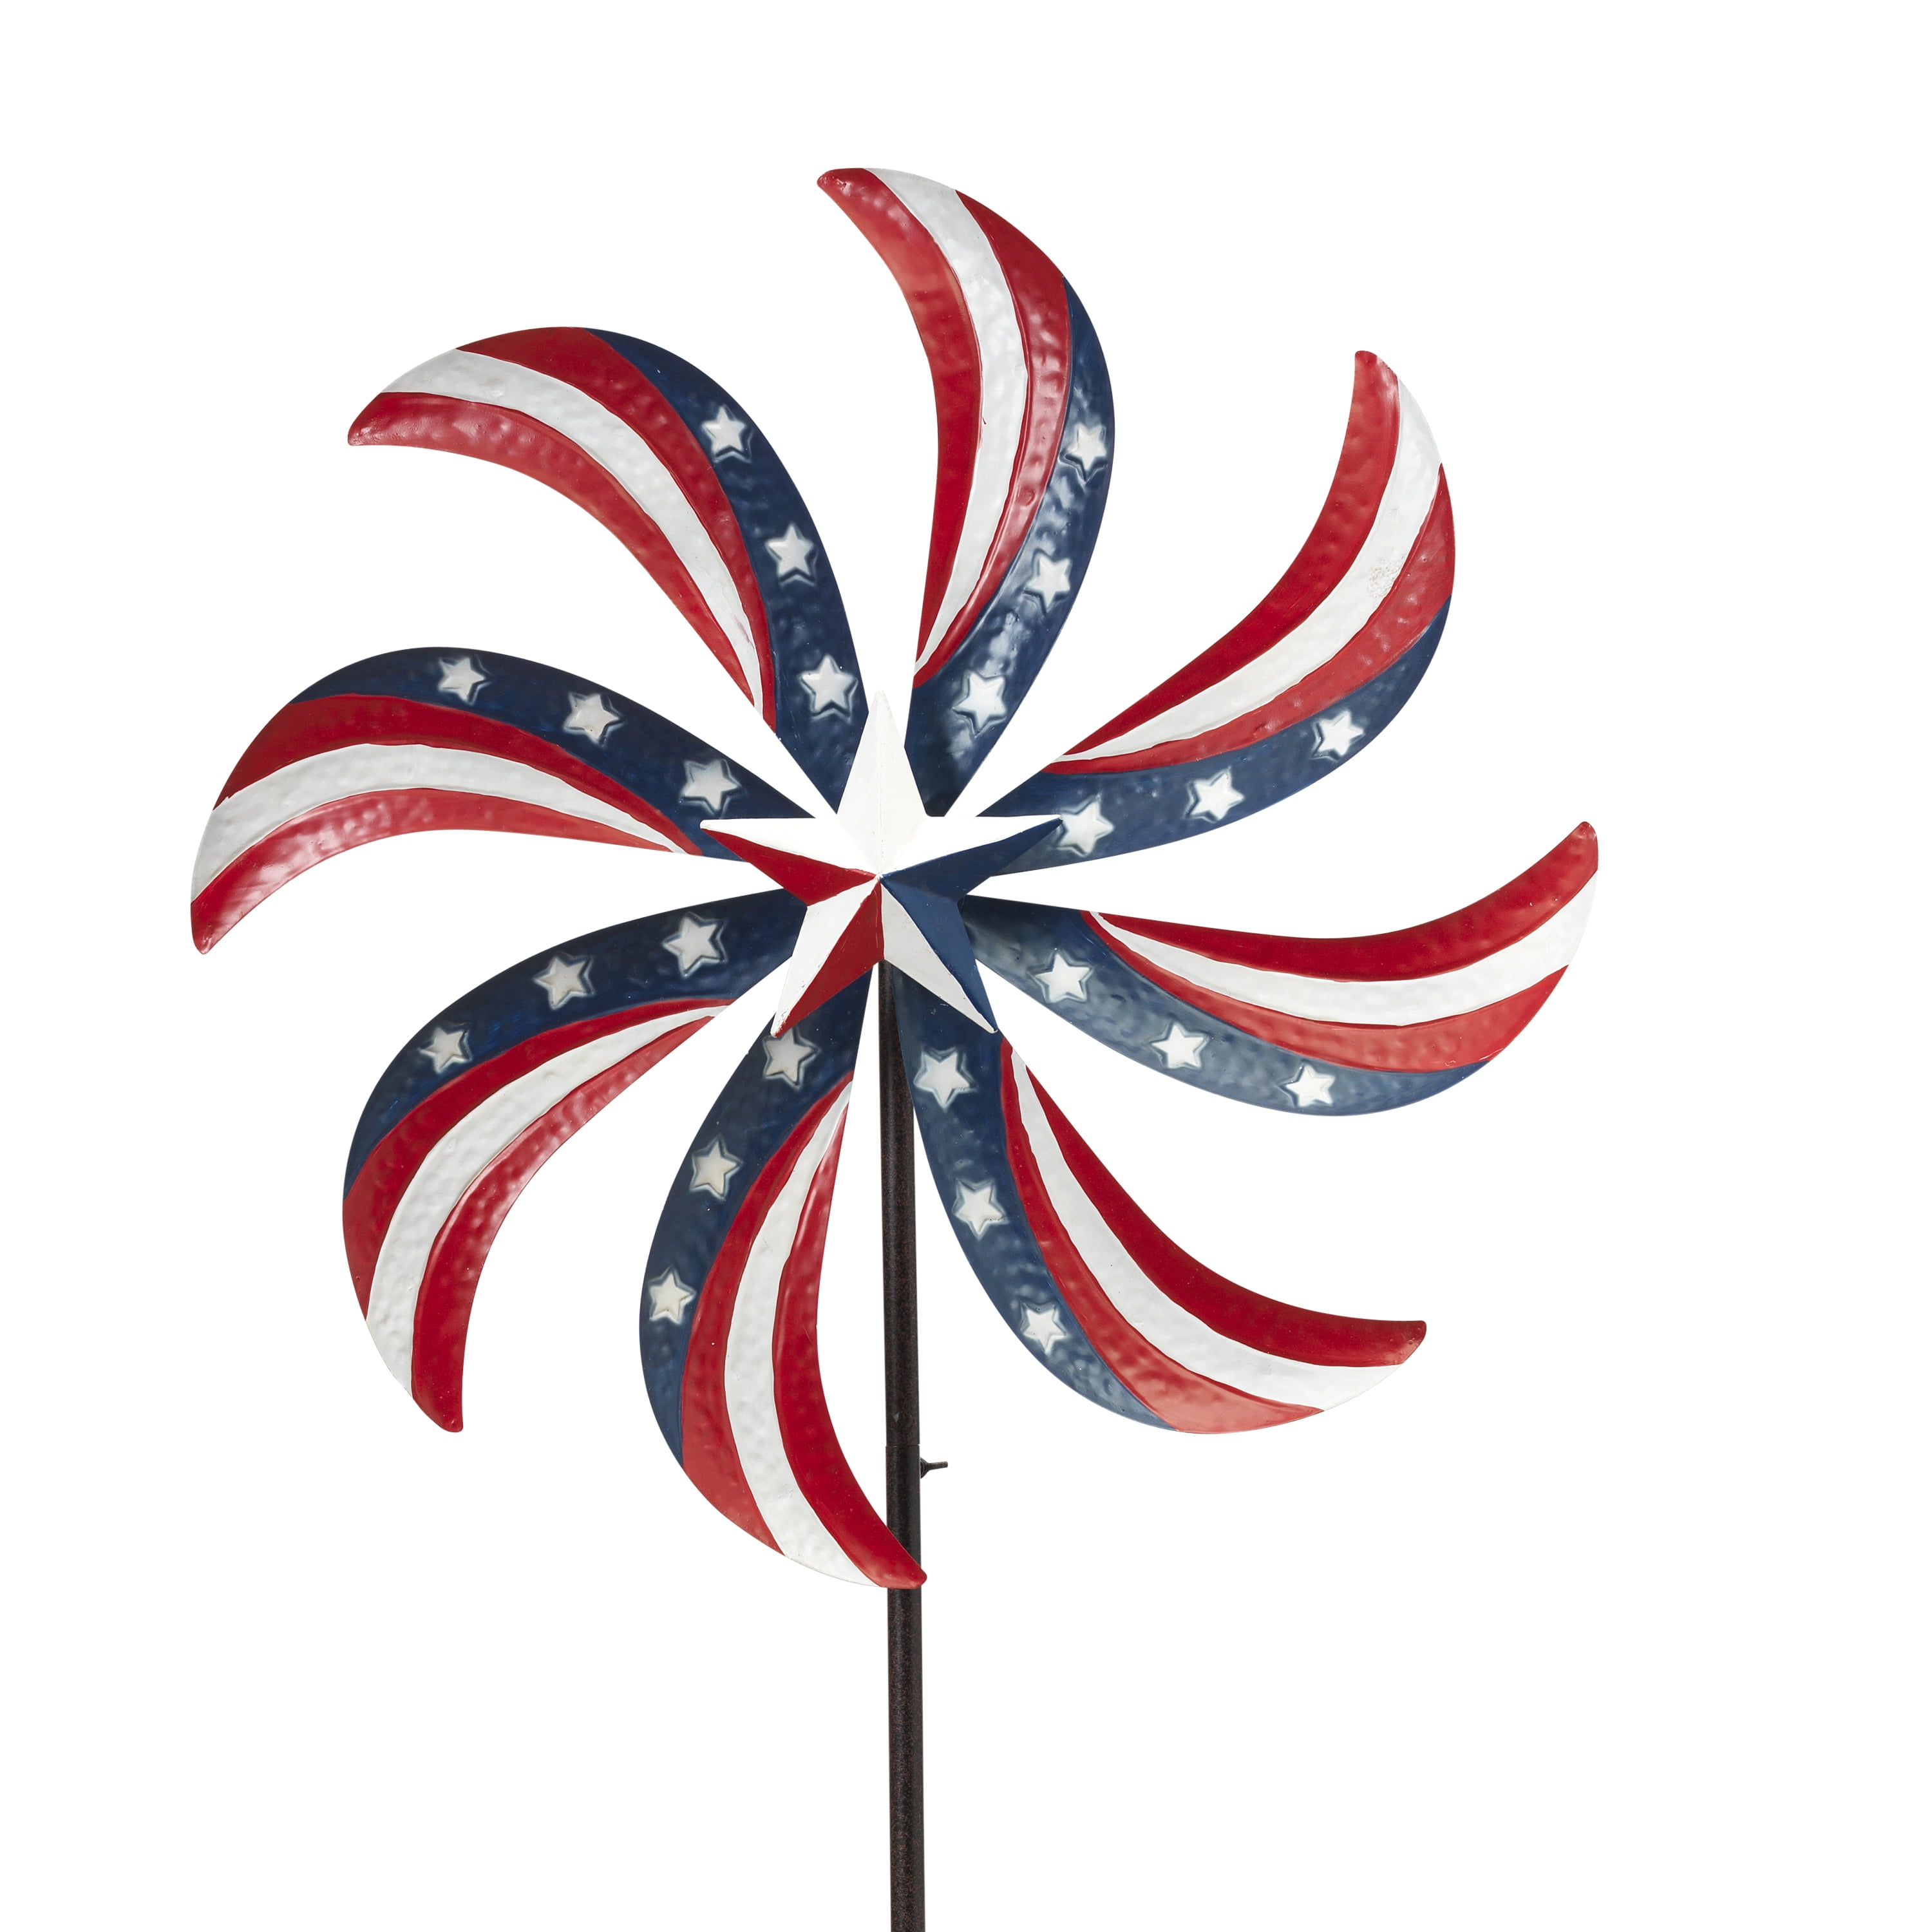 SPORTS &YARD DECOR PATRIOTIC WIND SPINNER> PATRIOTS-RED SOX-NY GIANTS-YANKEES 